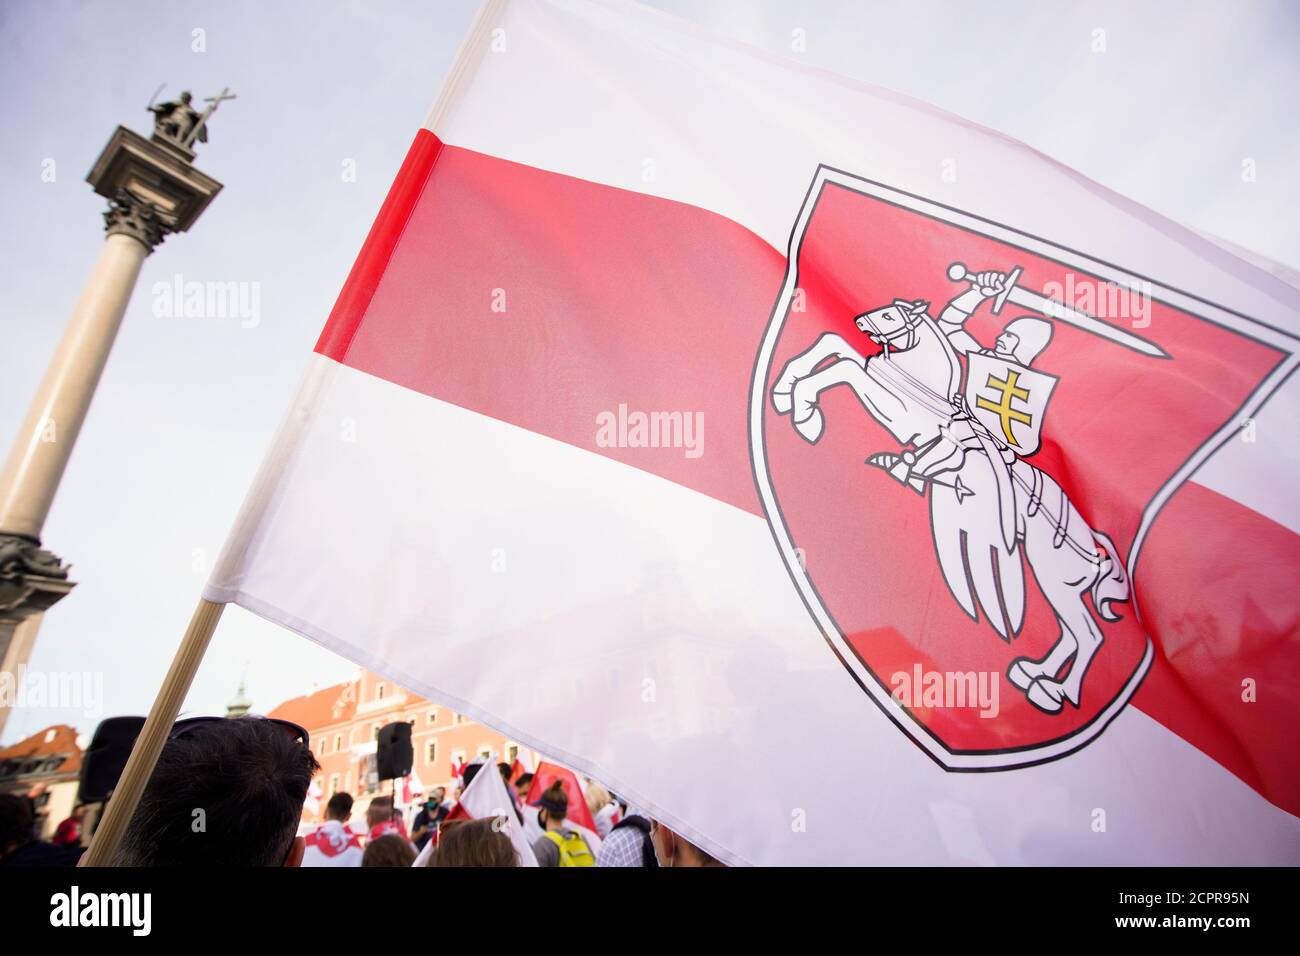 A man holds a Belarusian White-Red-White flag with the Pogon symbol in Warsaw, Poland on September 19, 2020. Several dozen people, mostly Belarusians Stock Photo